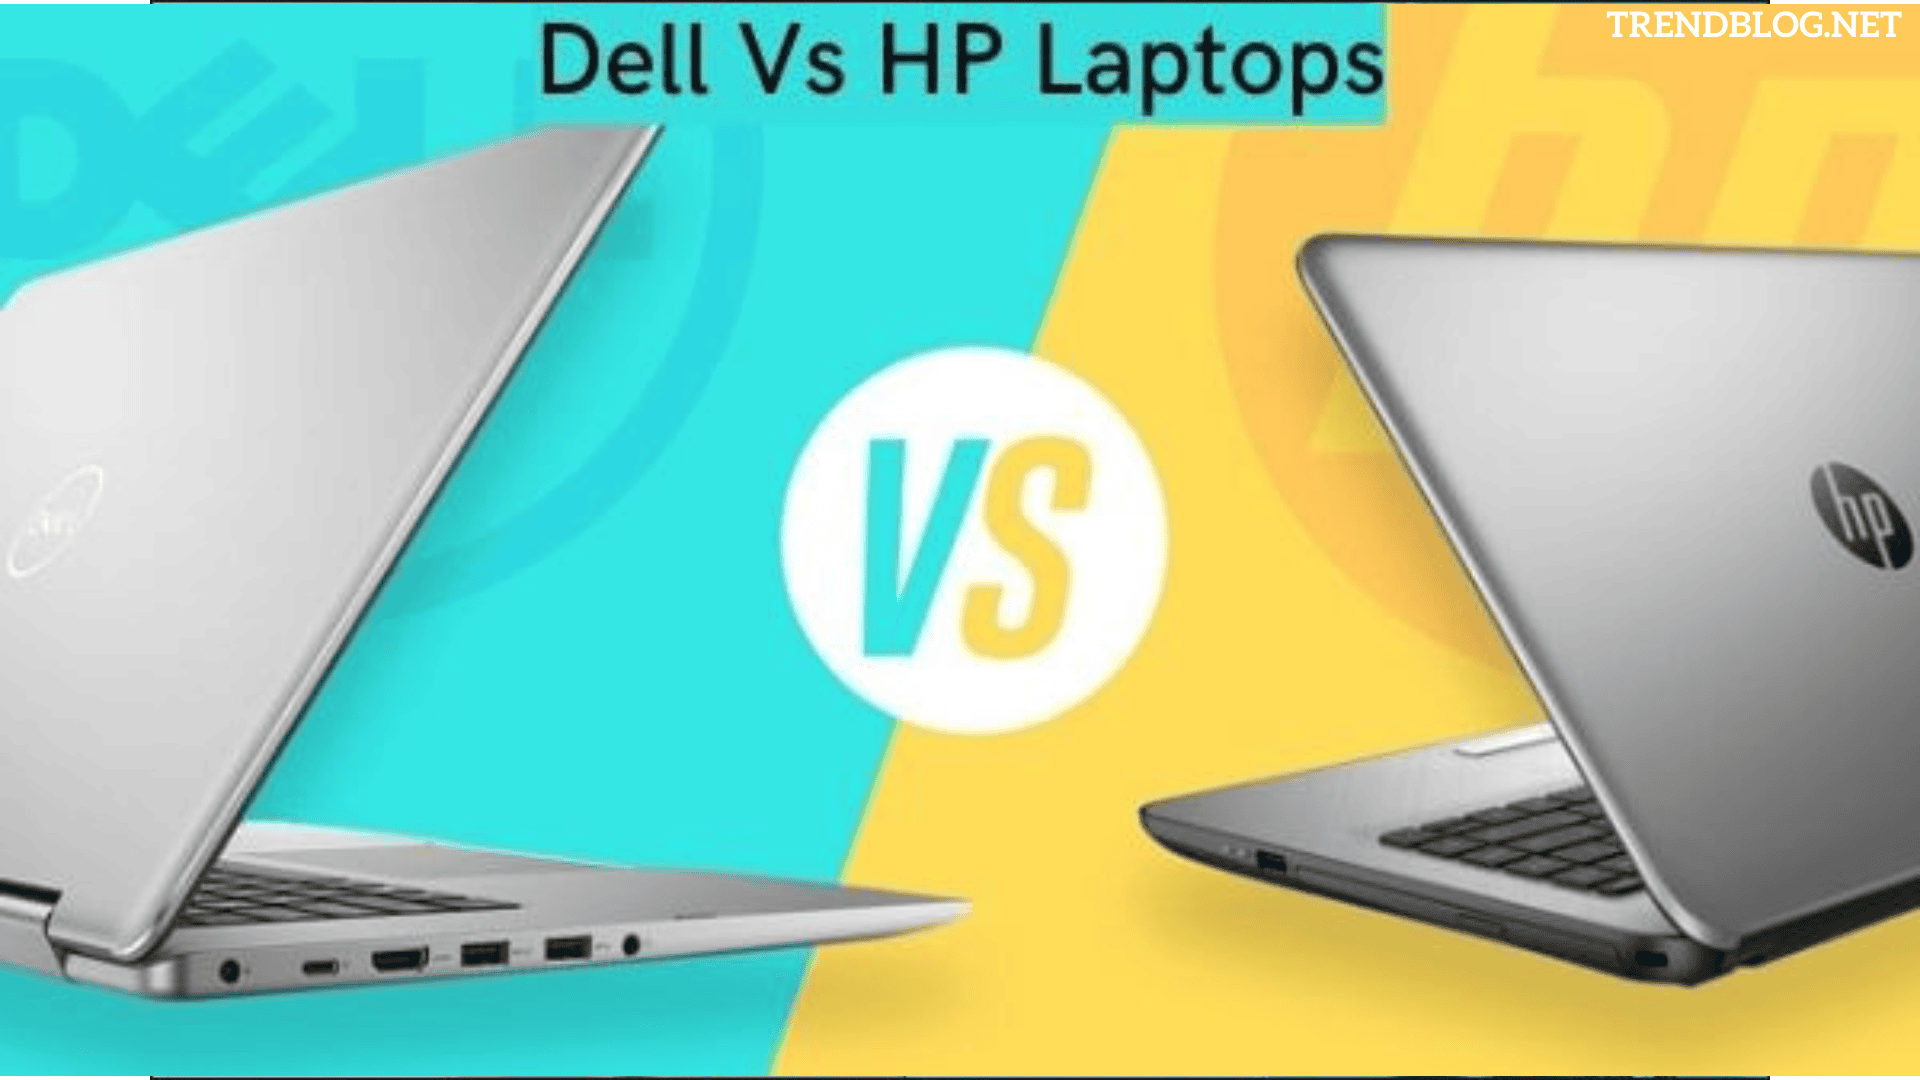  Which Brand Is Better Hp or Dell: Design, Price, Components